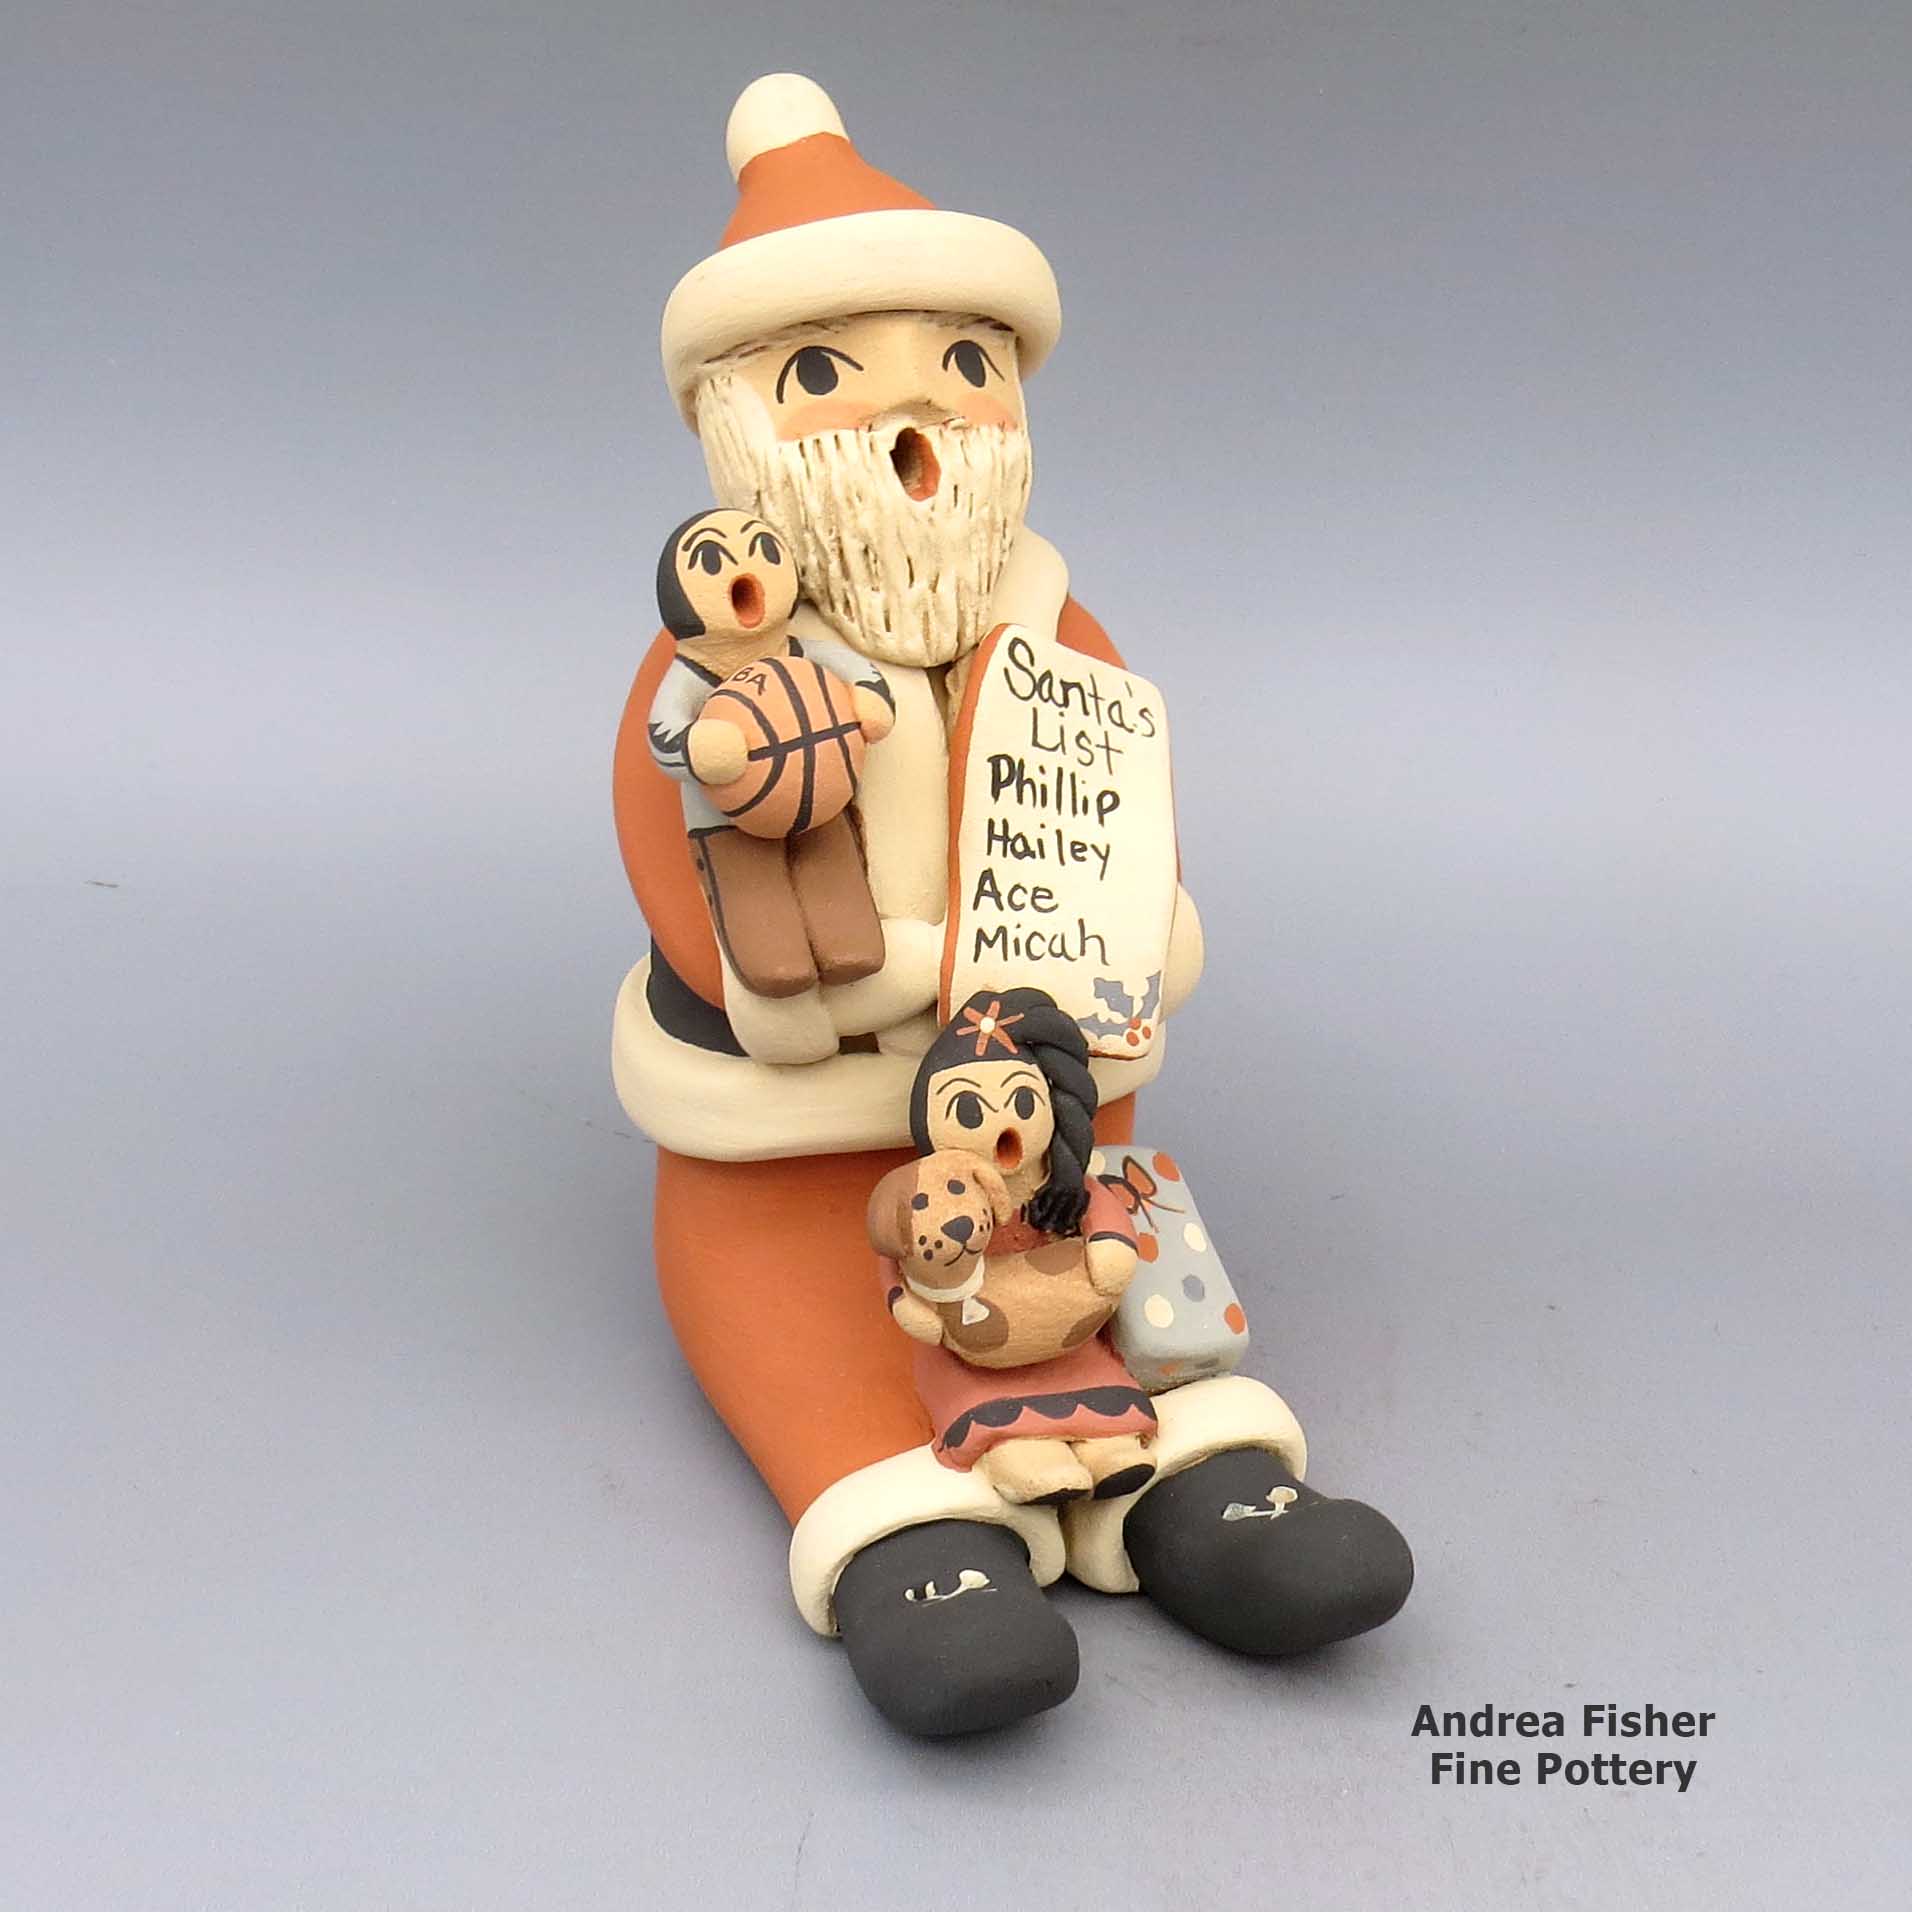 Polychrome Santa Claus storyteller with two children, basketball, puppy, list, and present made by Chrislyn Fragua of Jemez